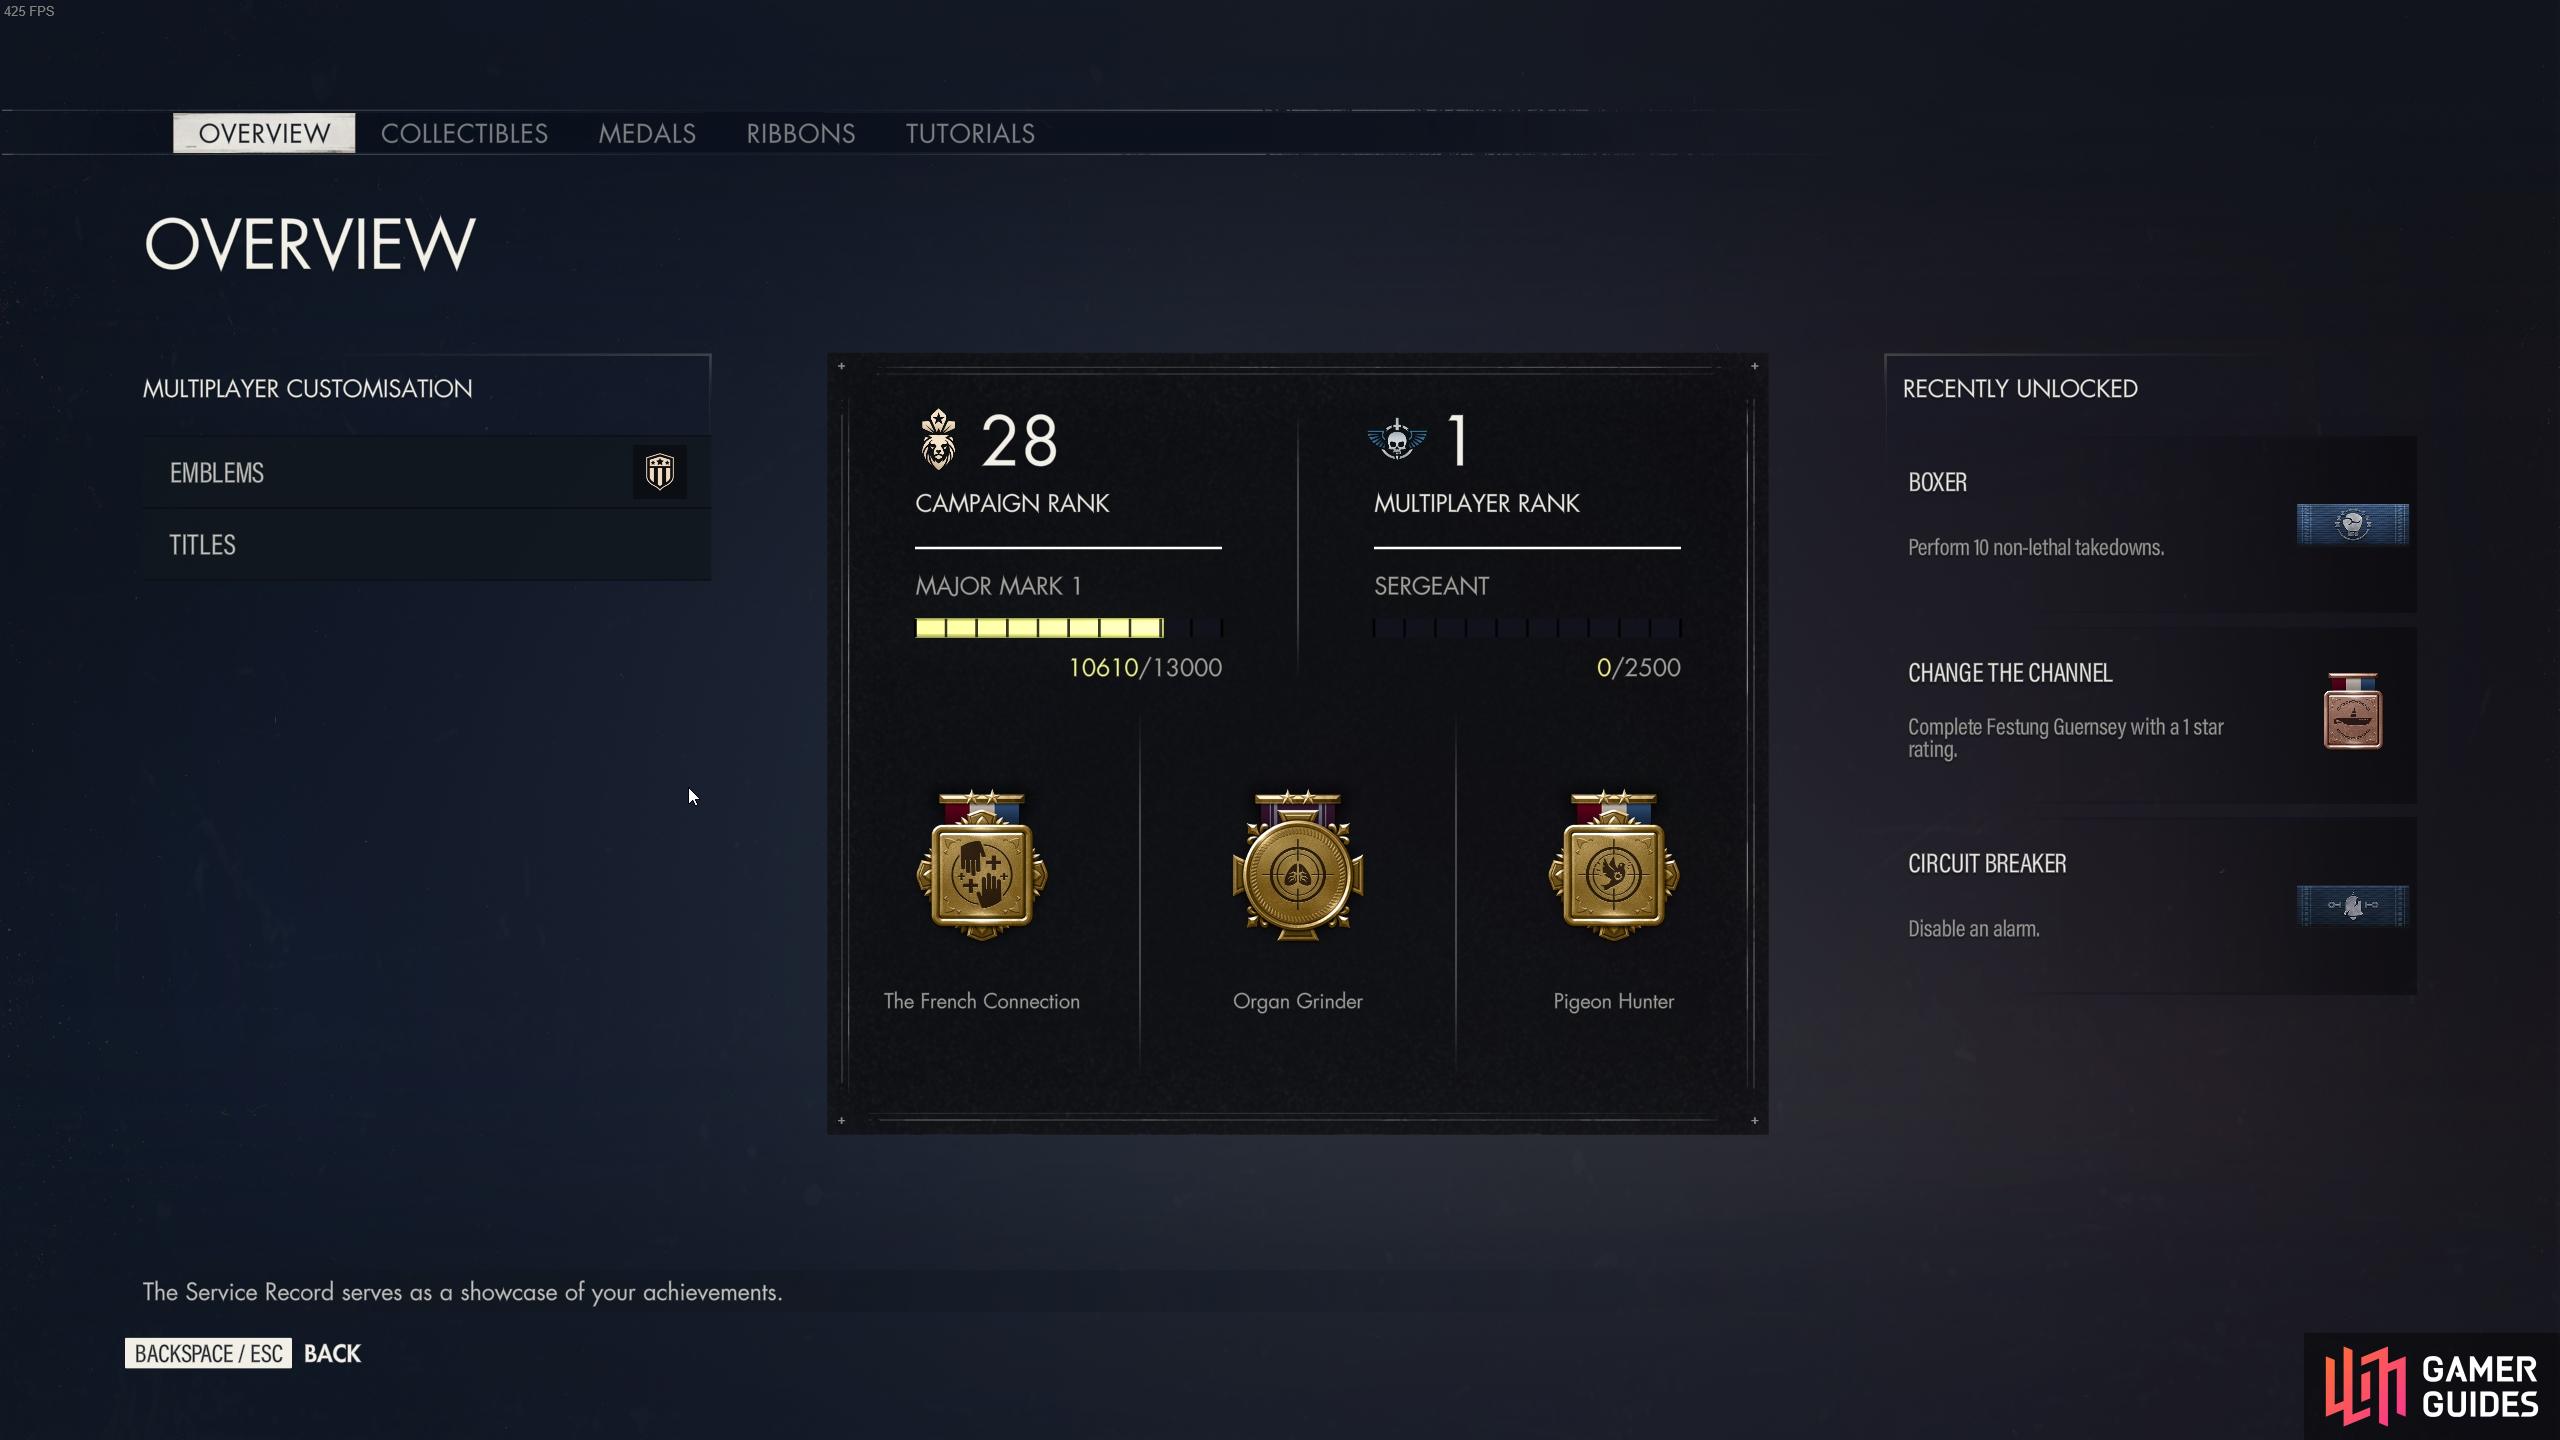 You can feature specific medals on your Player Card when you hover over them.